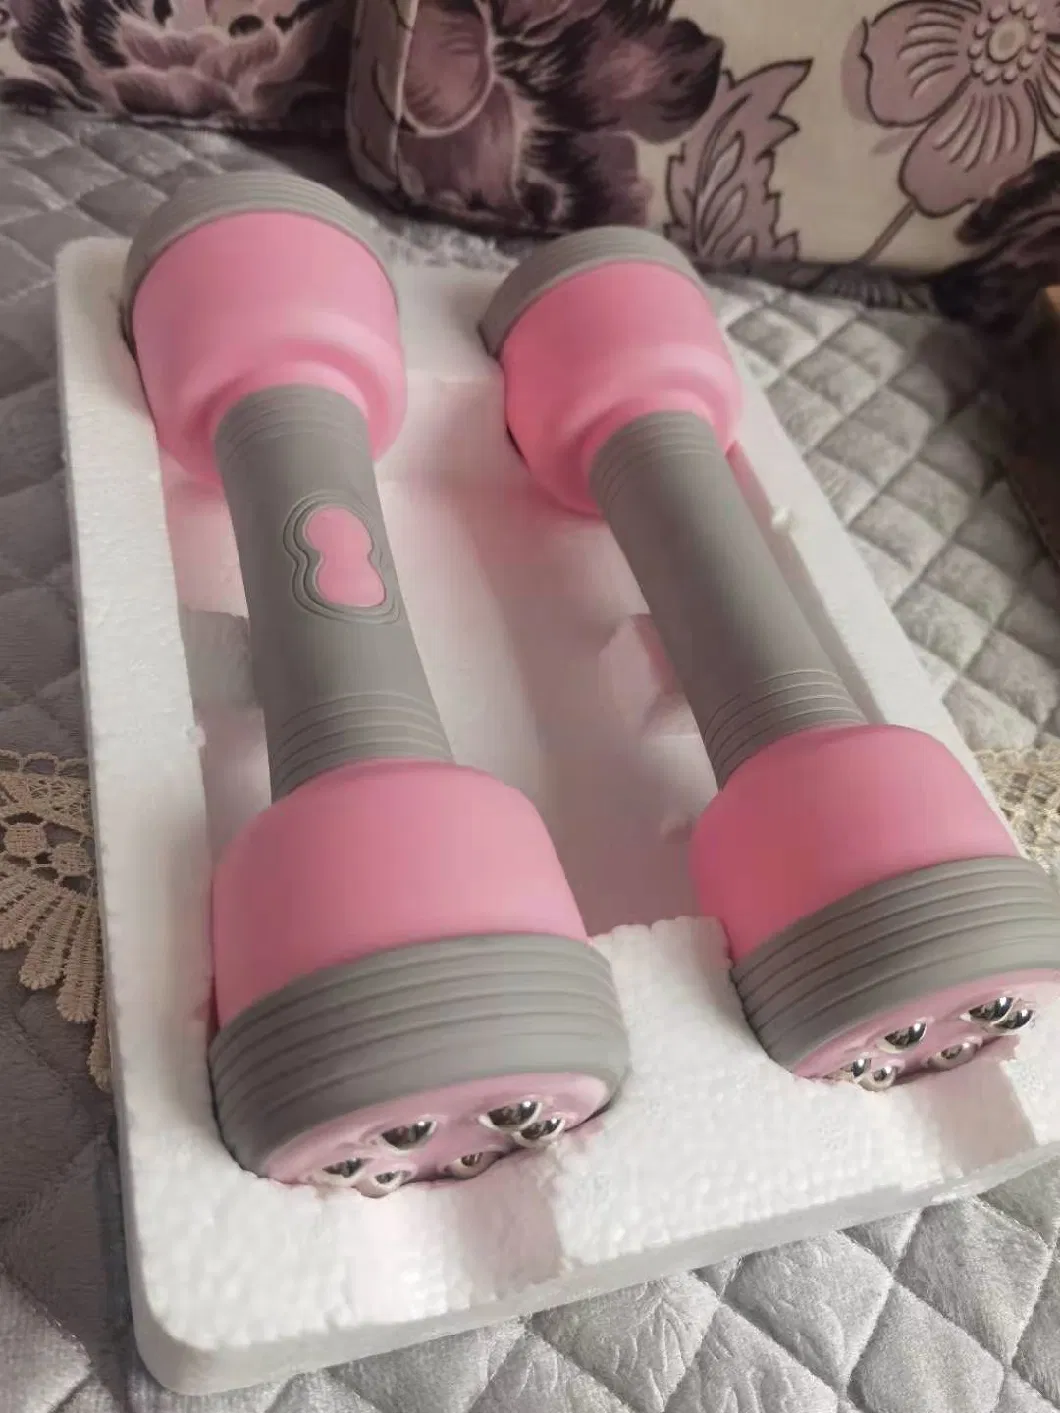 Wholesale Dumbell Best Price Online Chrome Dumbbells with Massager